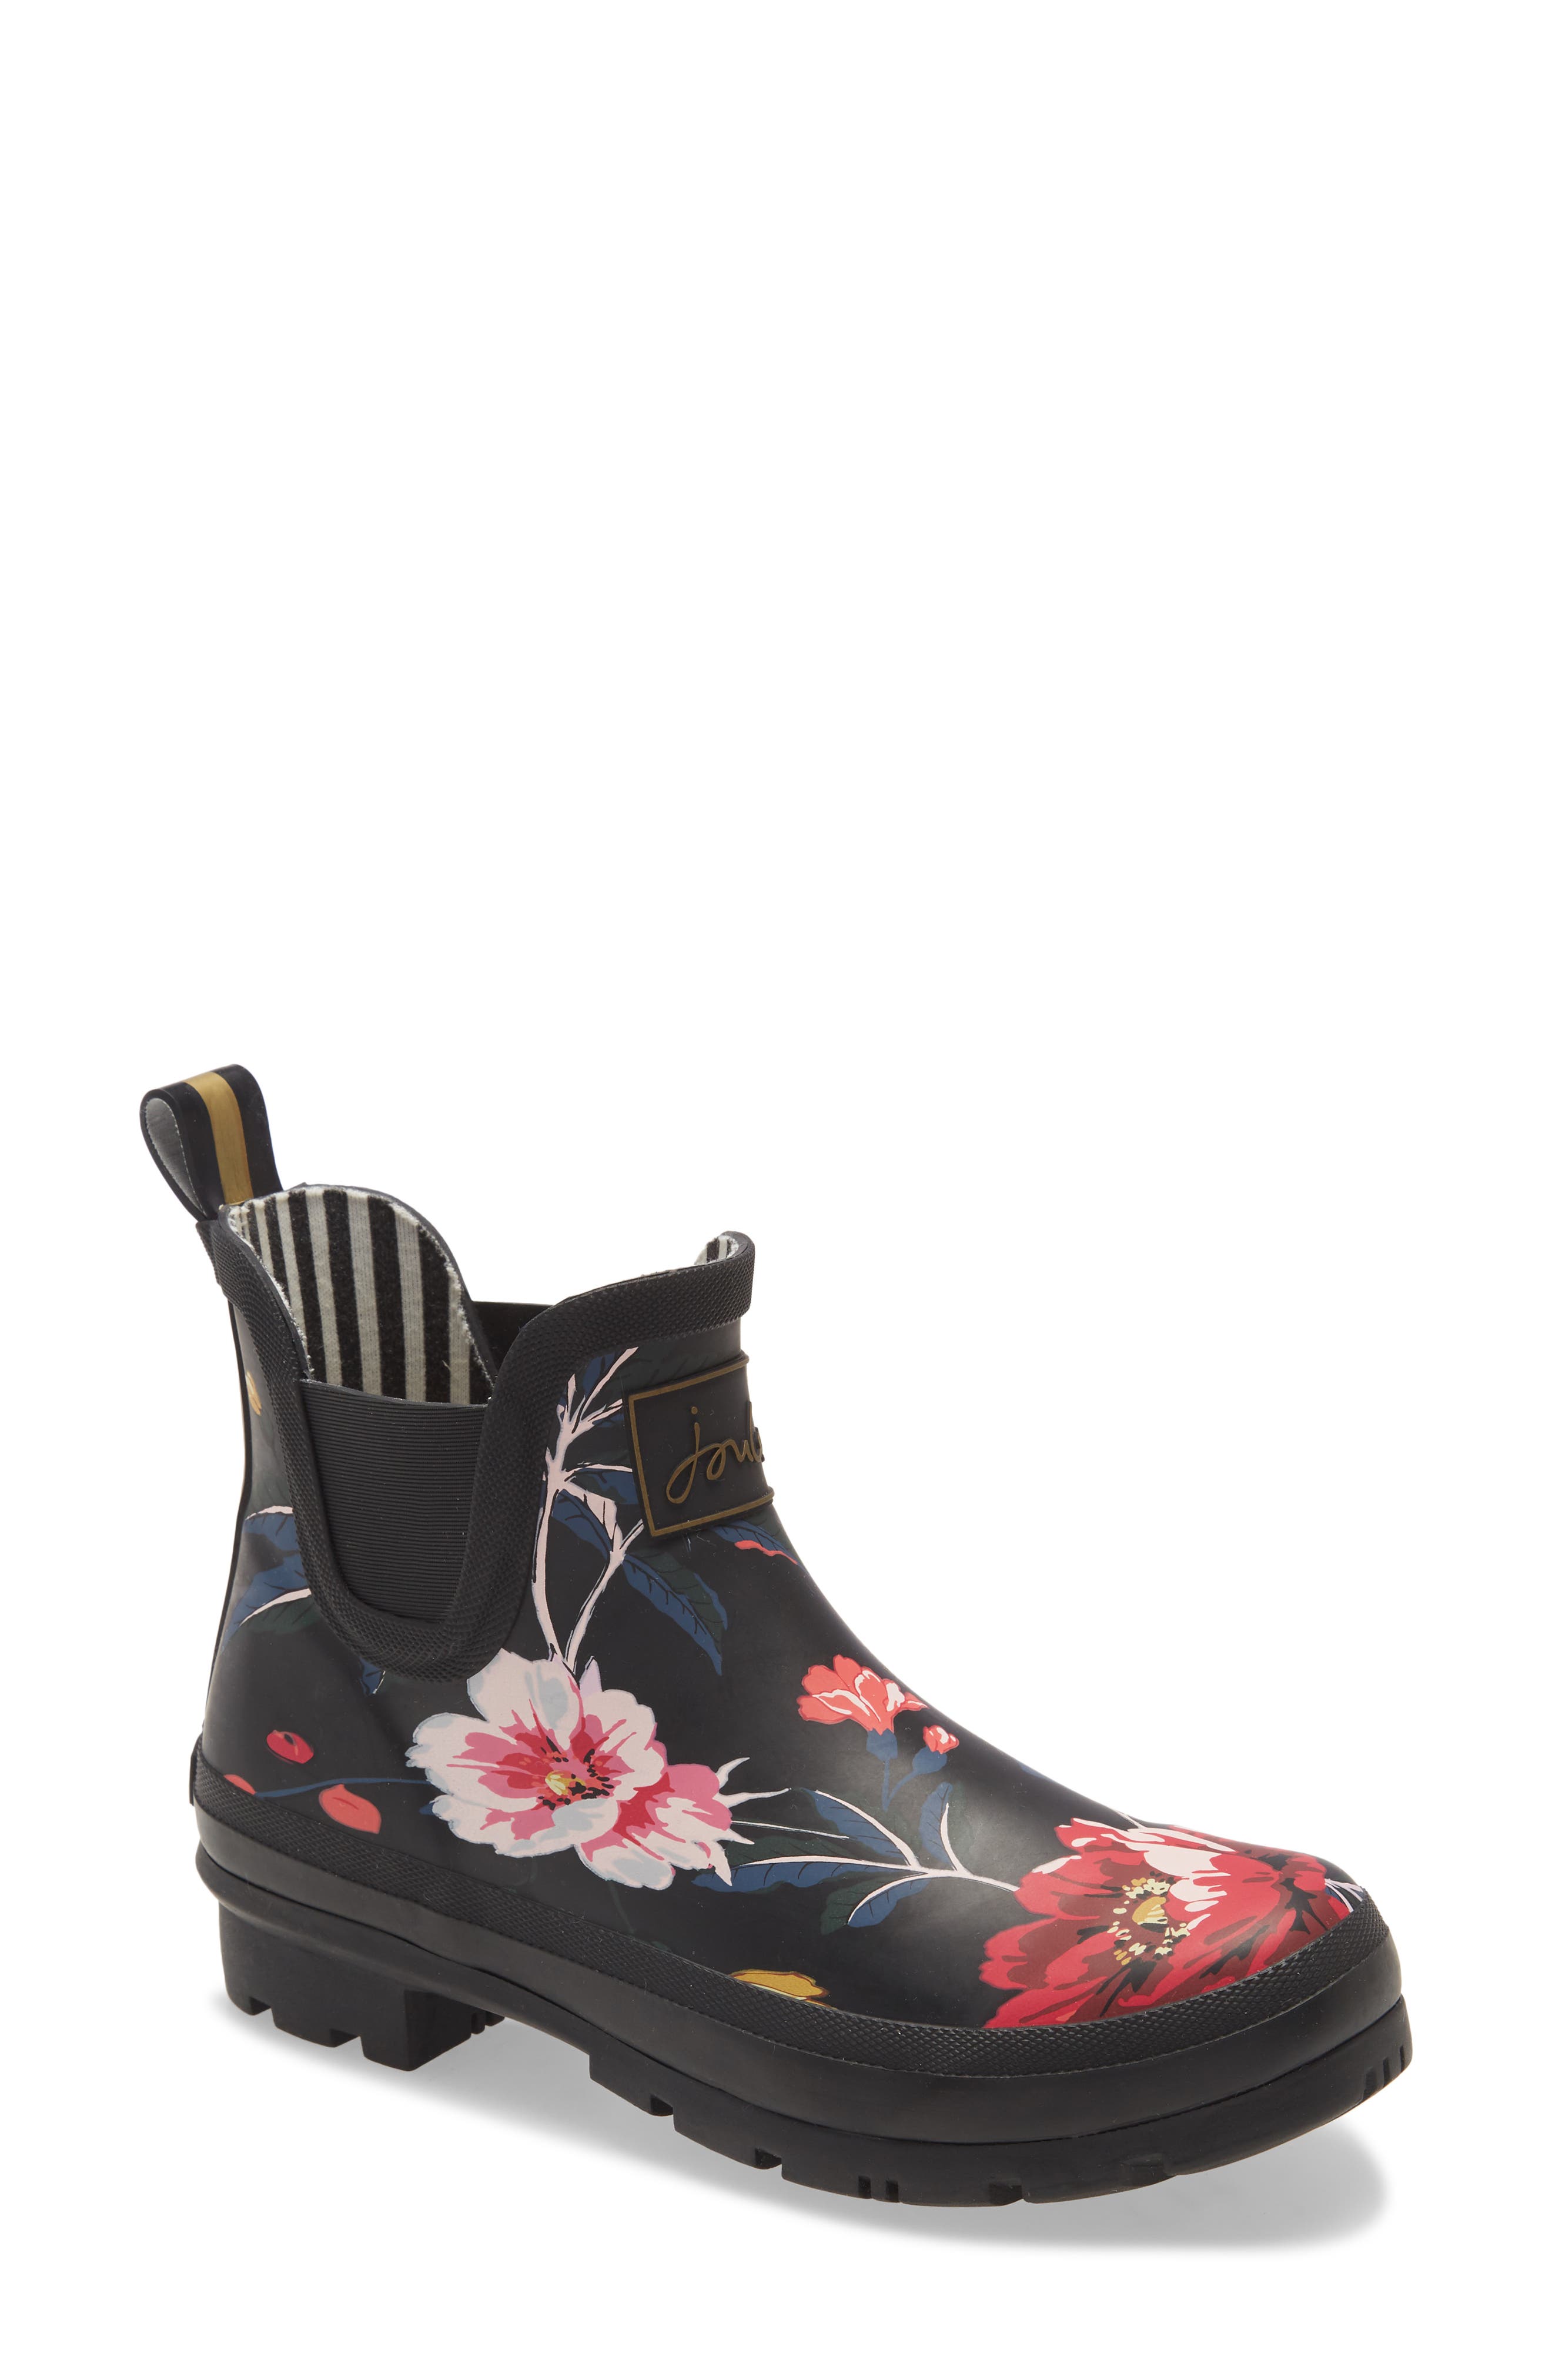 Women's Joules Shoes | Nordstrom